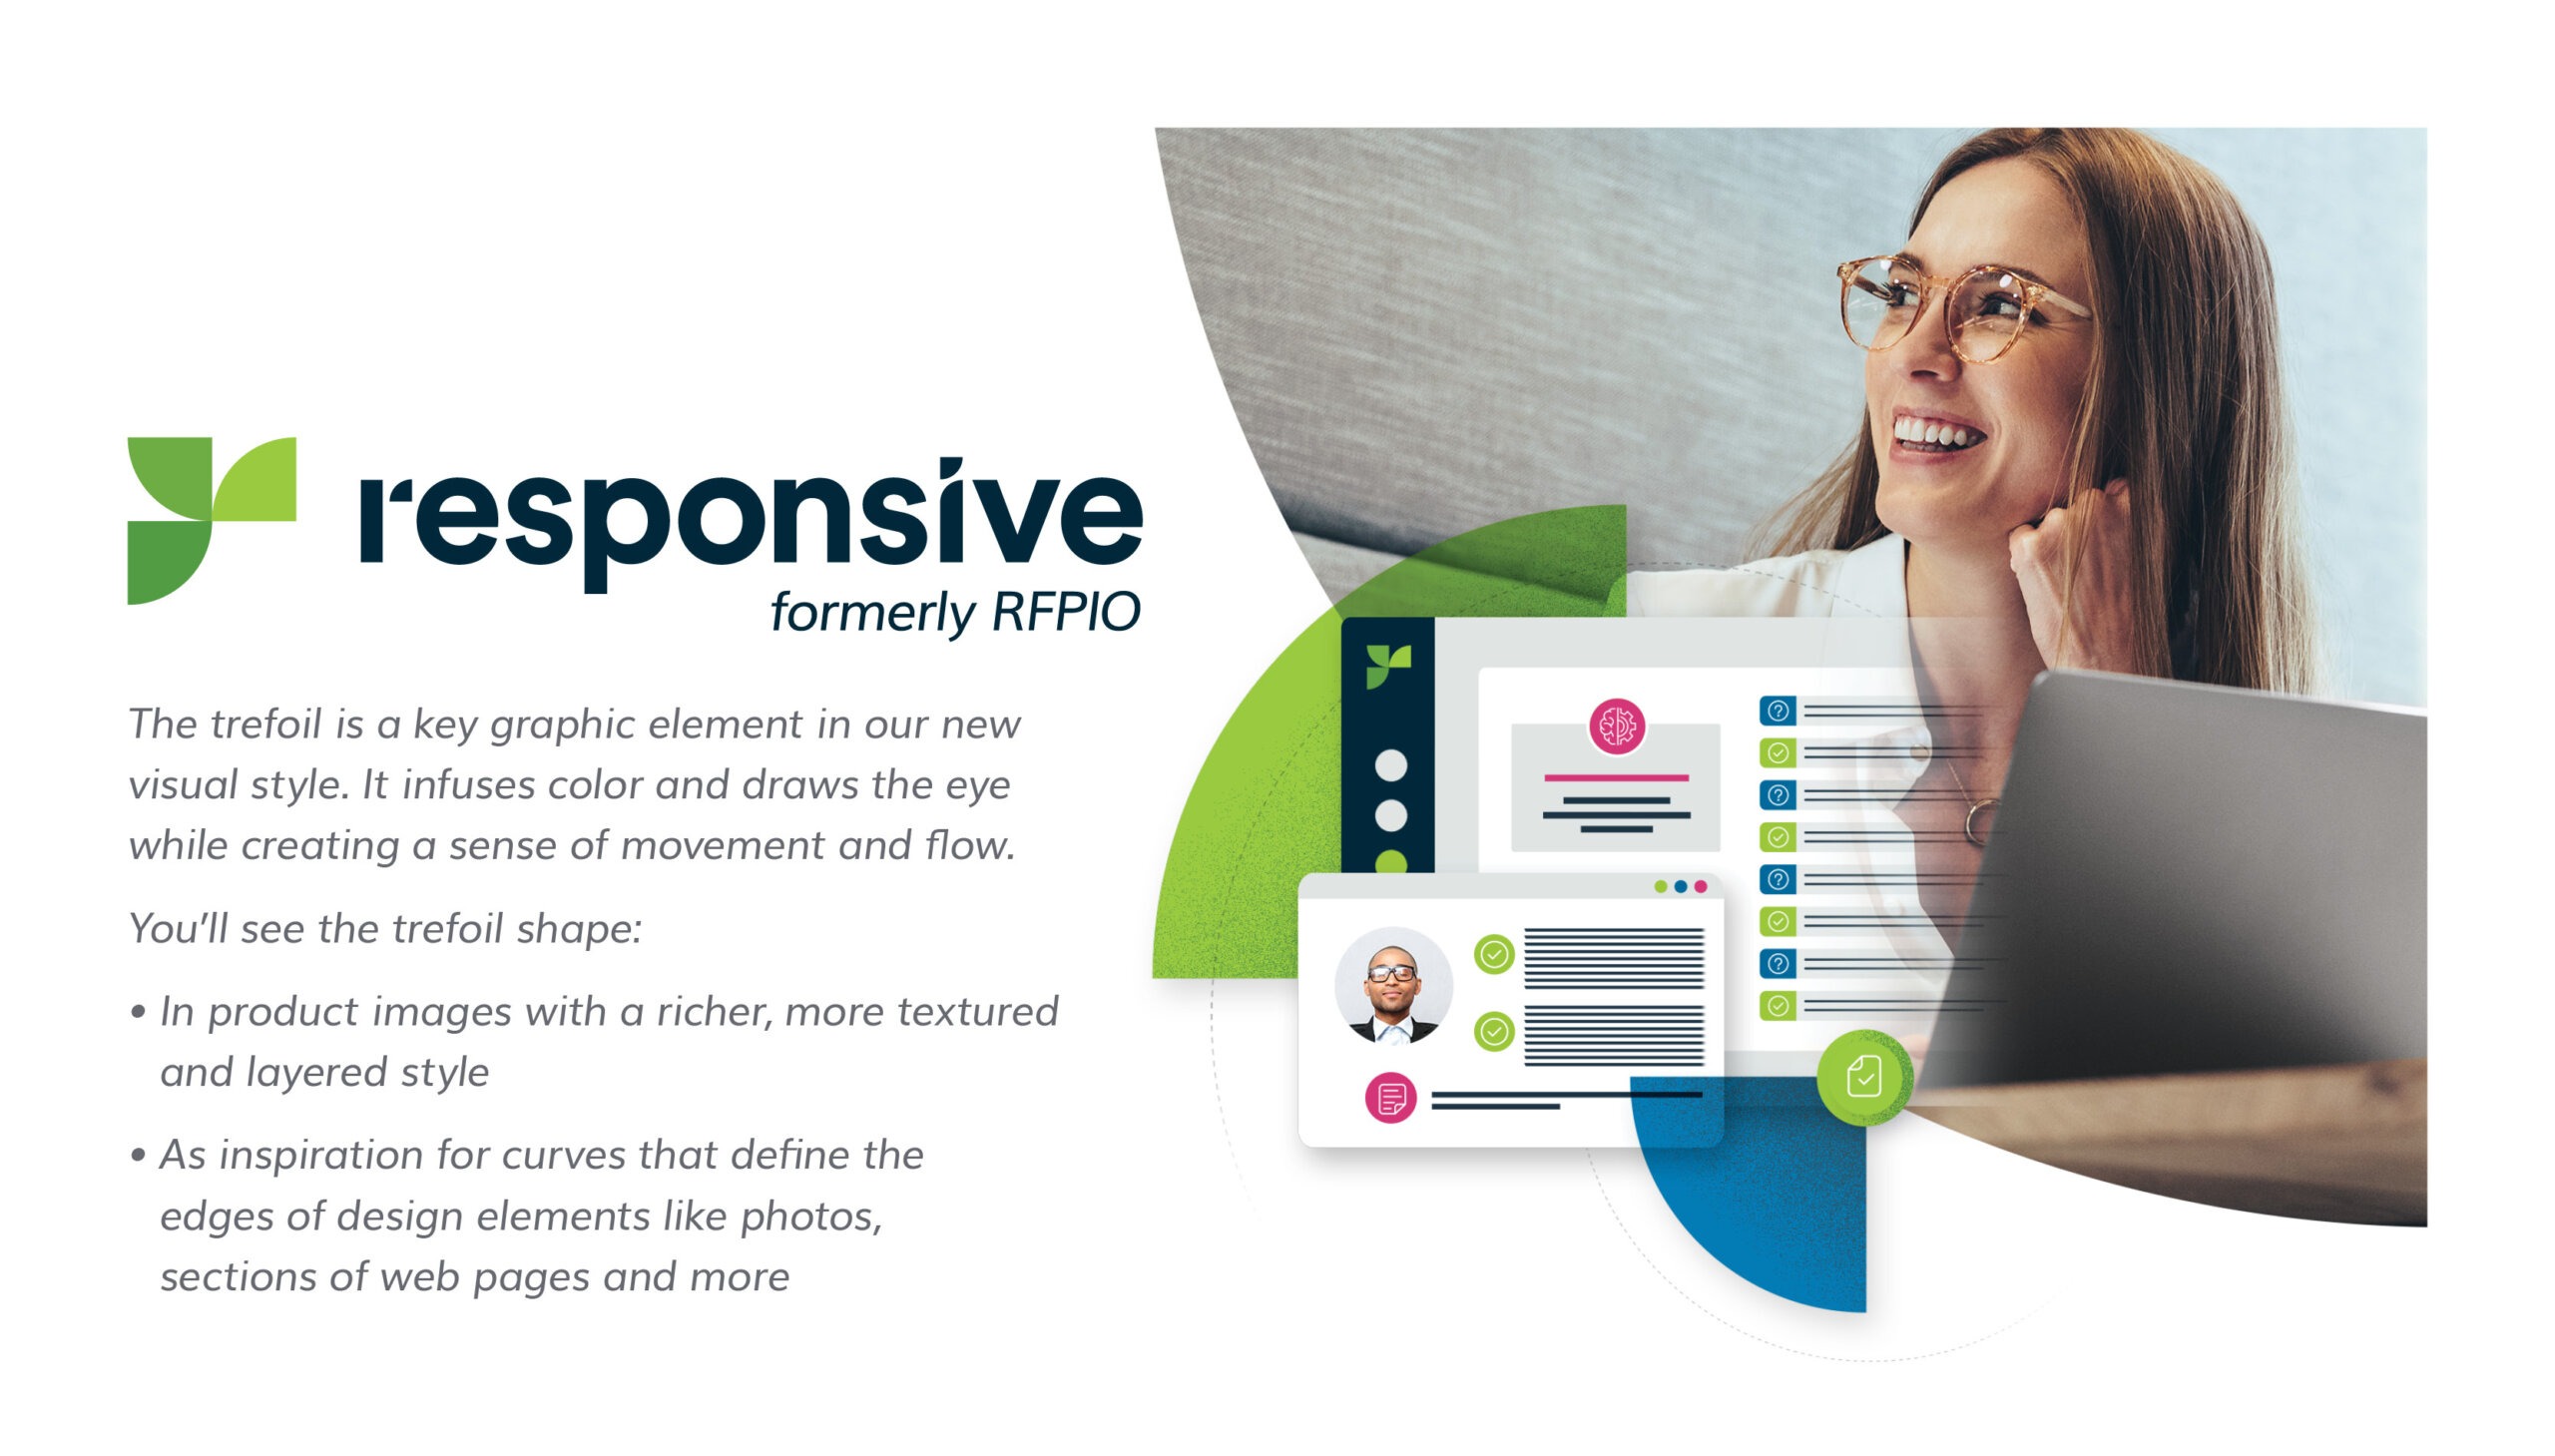 Responsive was RFPIO, new brand imagery overview blog image